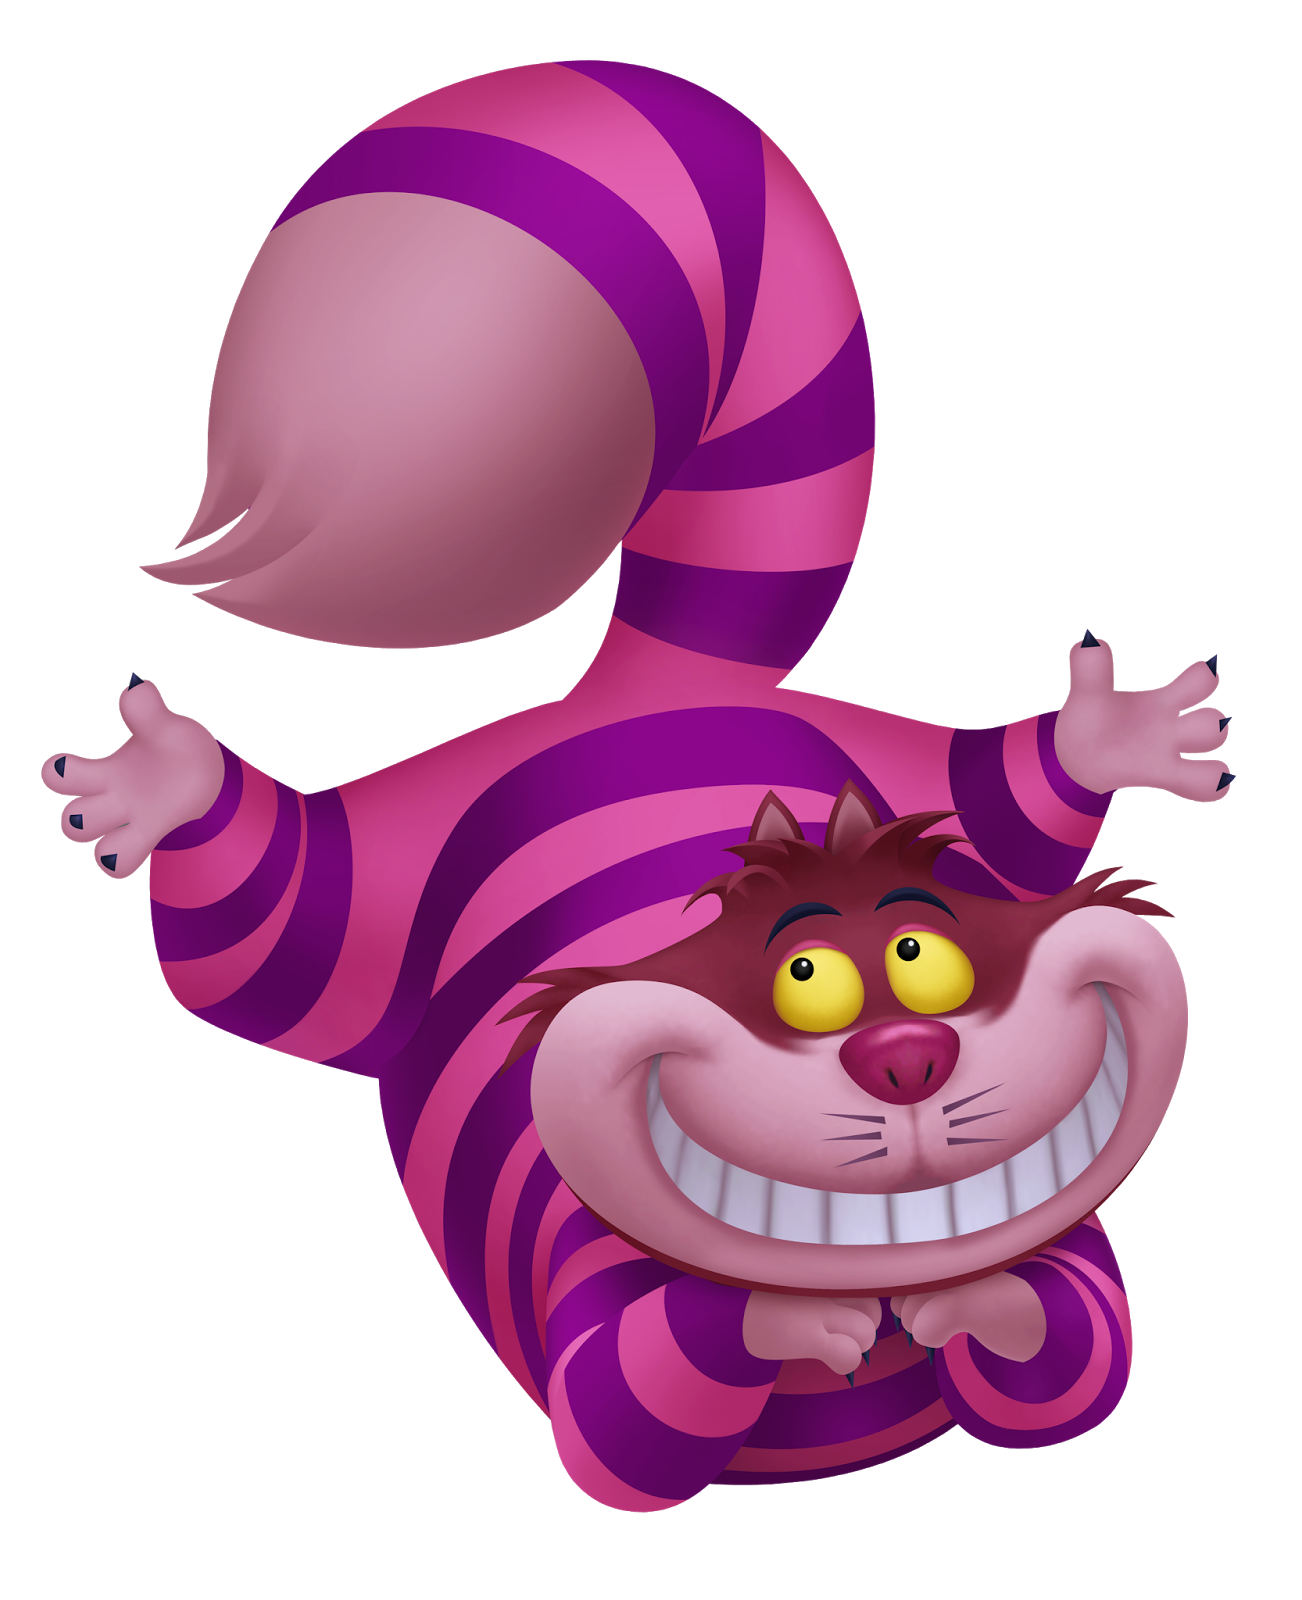 Does the Cheshire Cat really exist? | Hotelsclick.com Blog